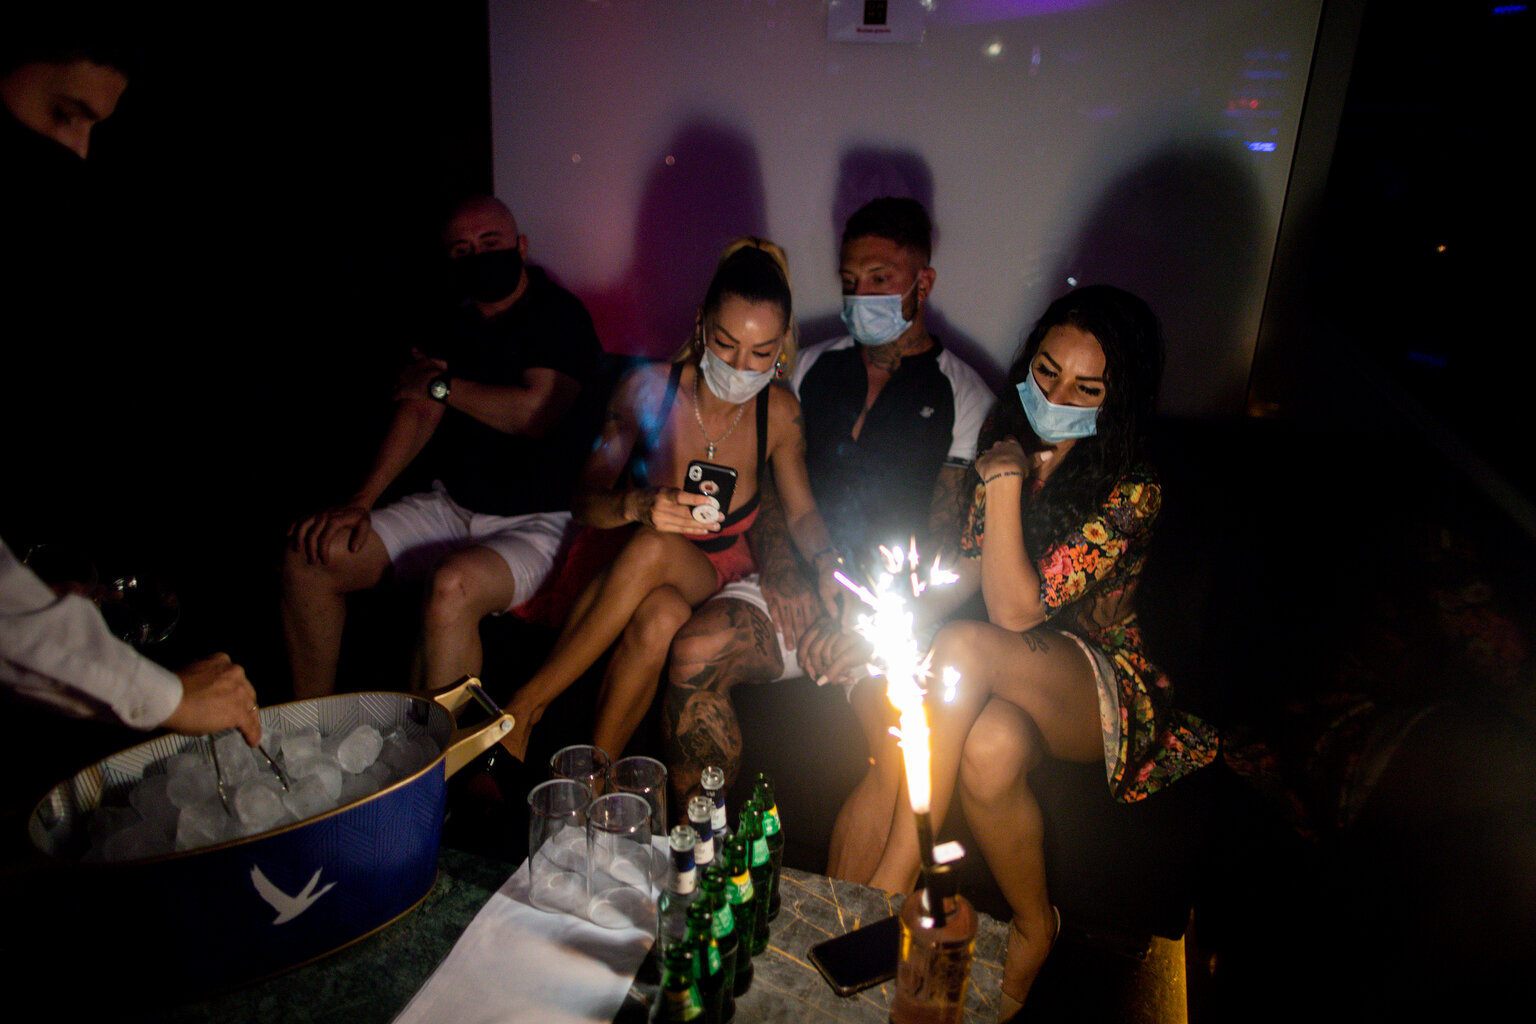  People wearing face masks to prevent the spread of coronavirus gather in a discotheque in Madrid, Spain, early Saturday, July 25, 2020. (AP Photo/Manu Fernandez) 